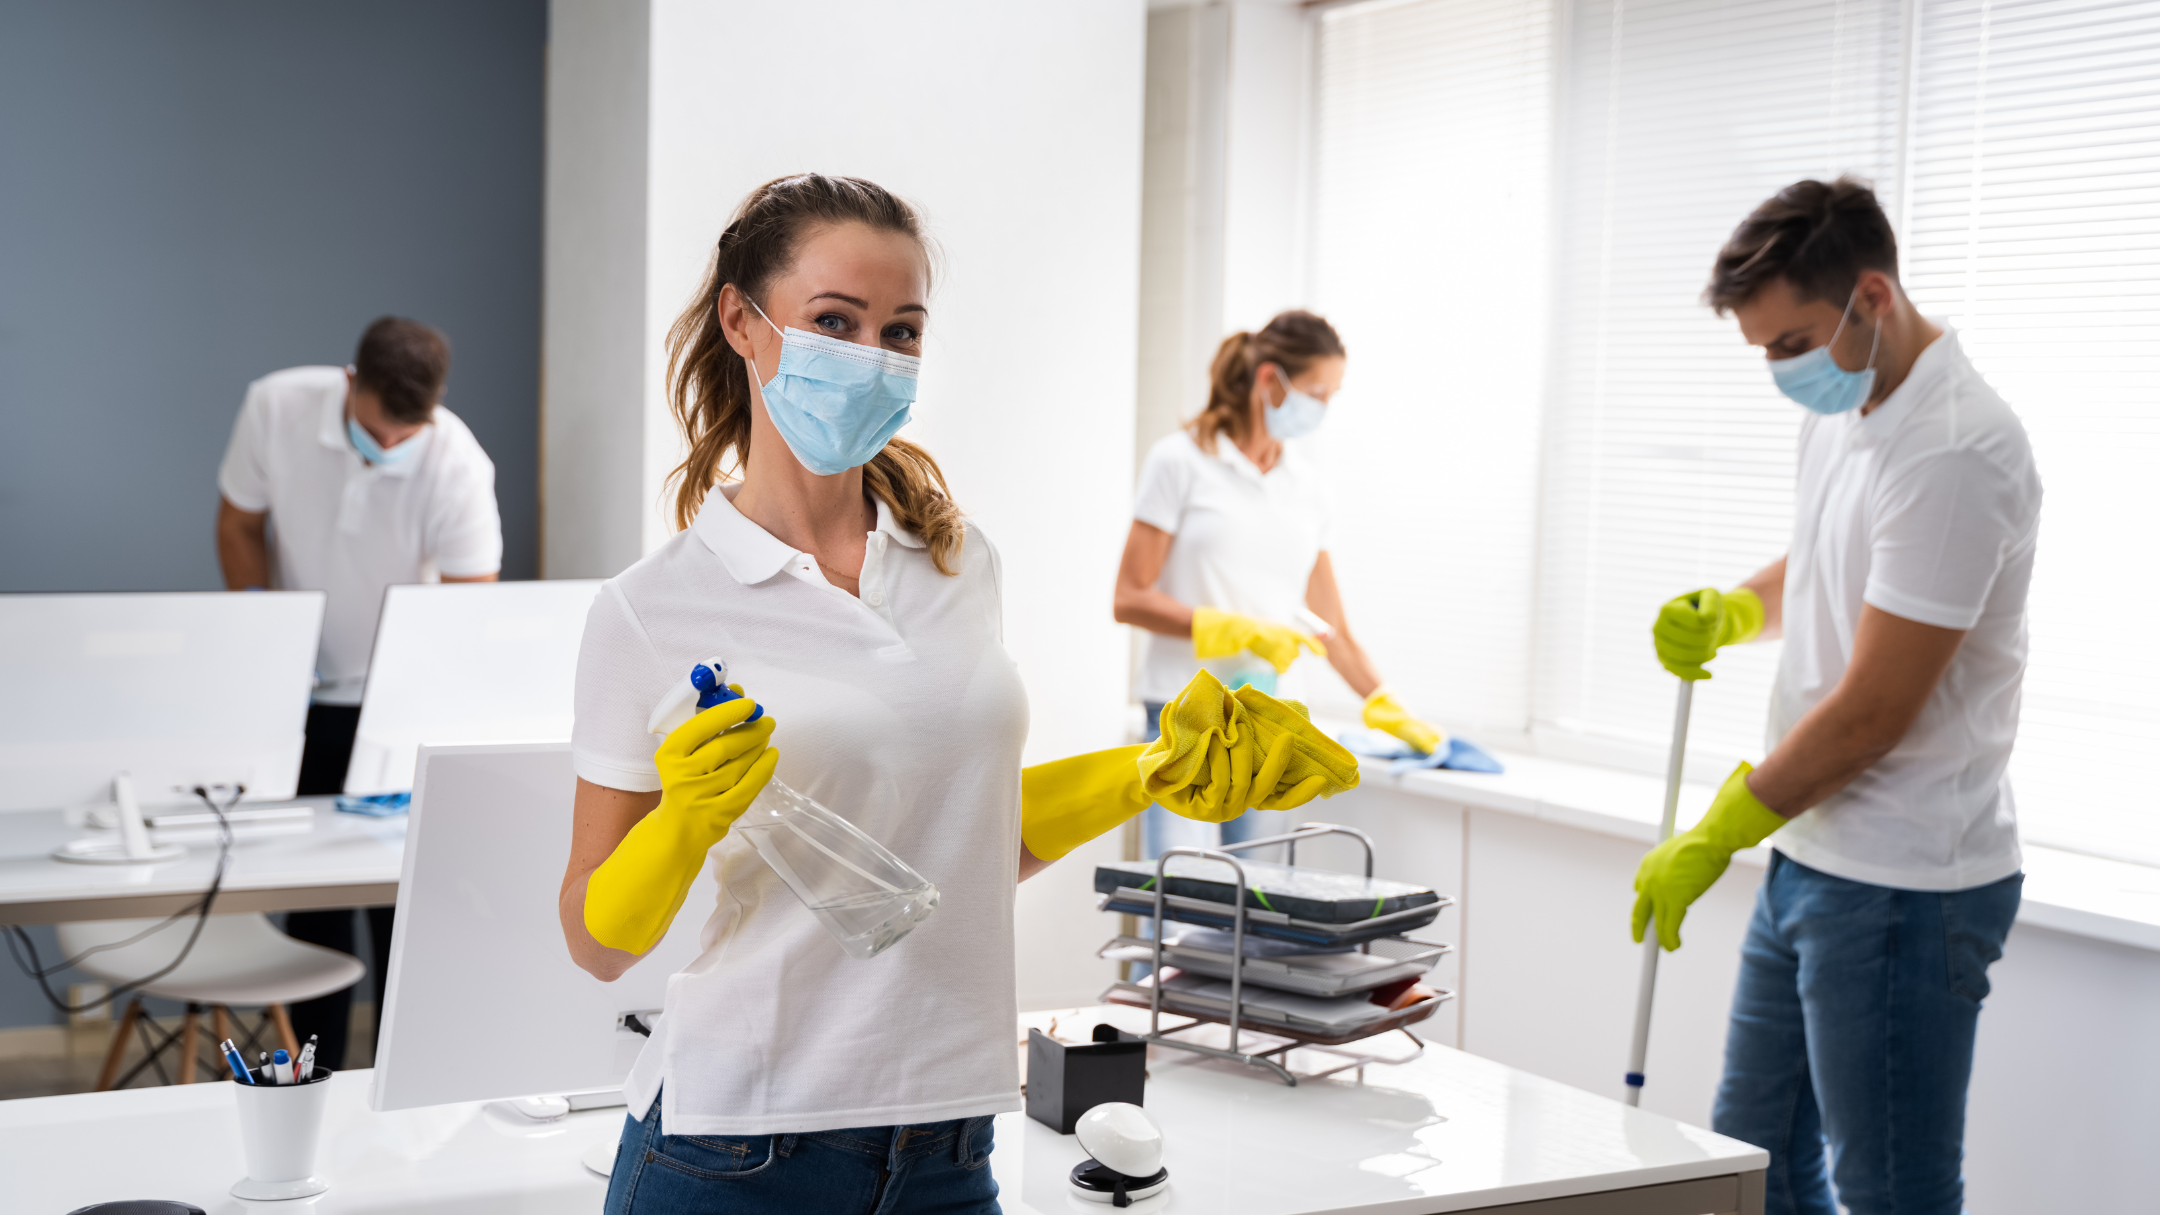 Maids cleaning an office